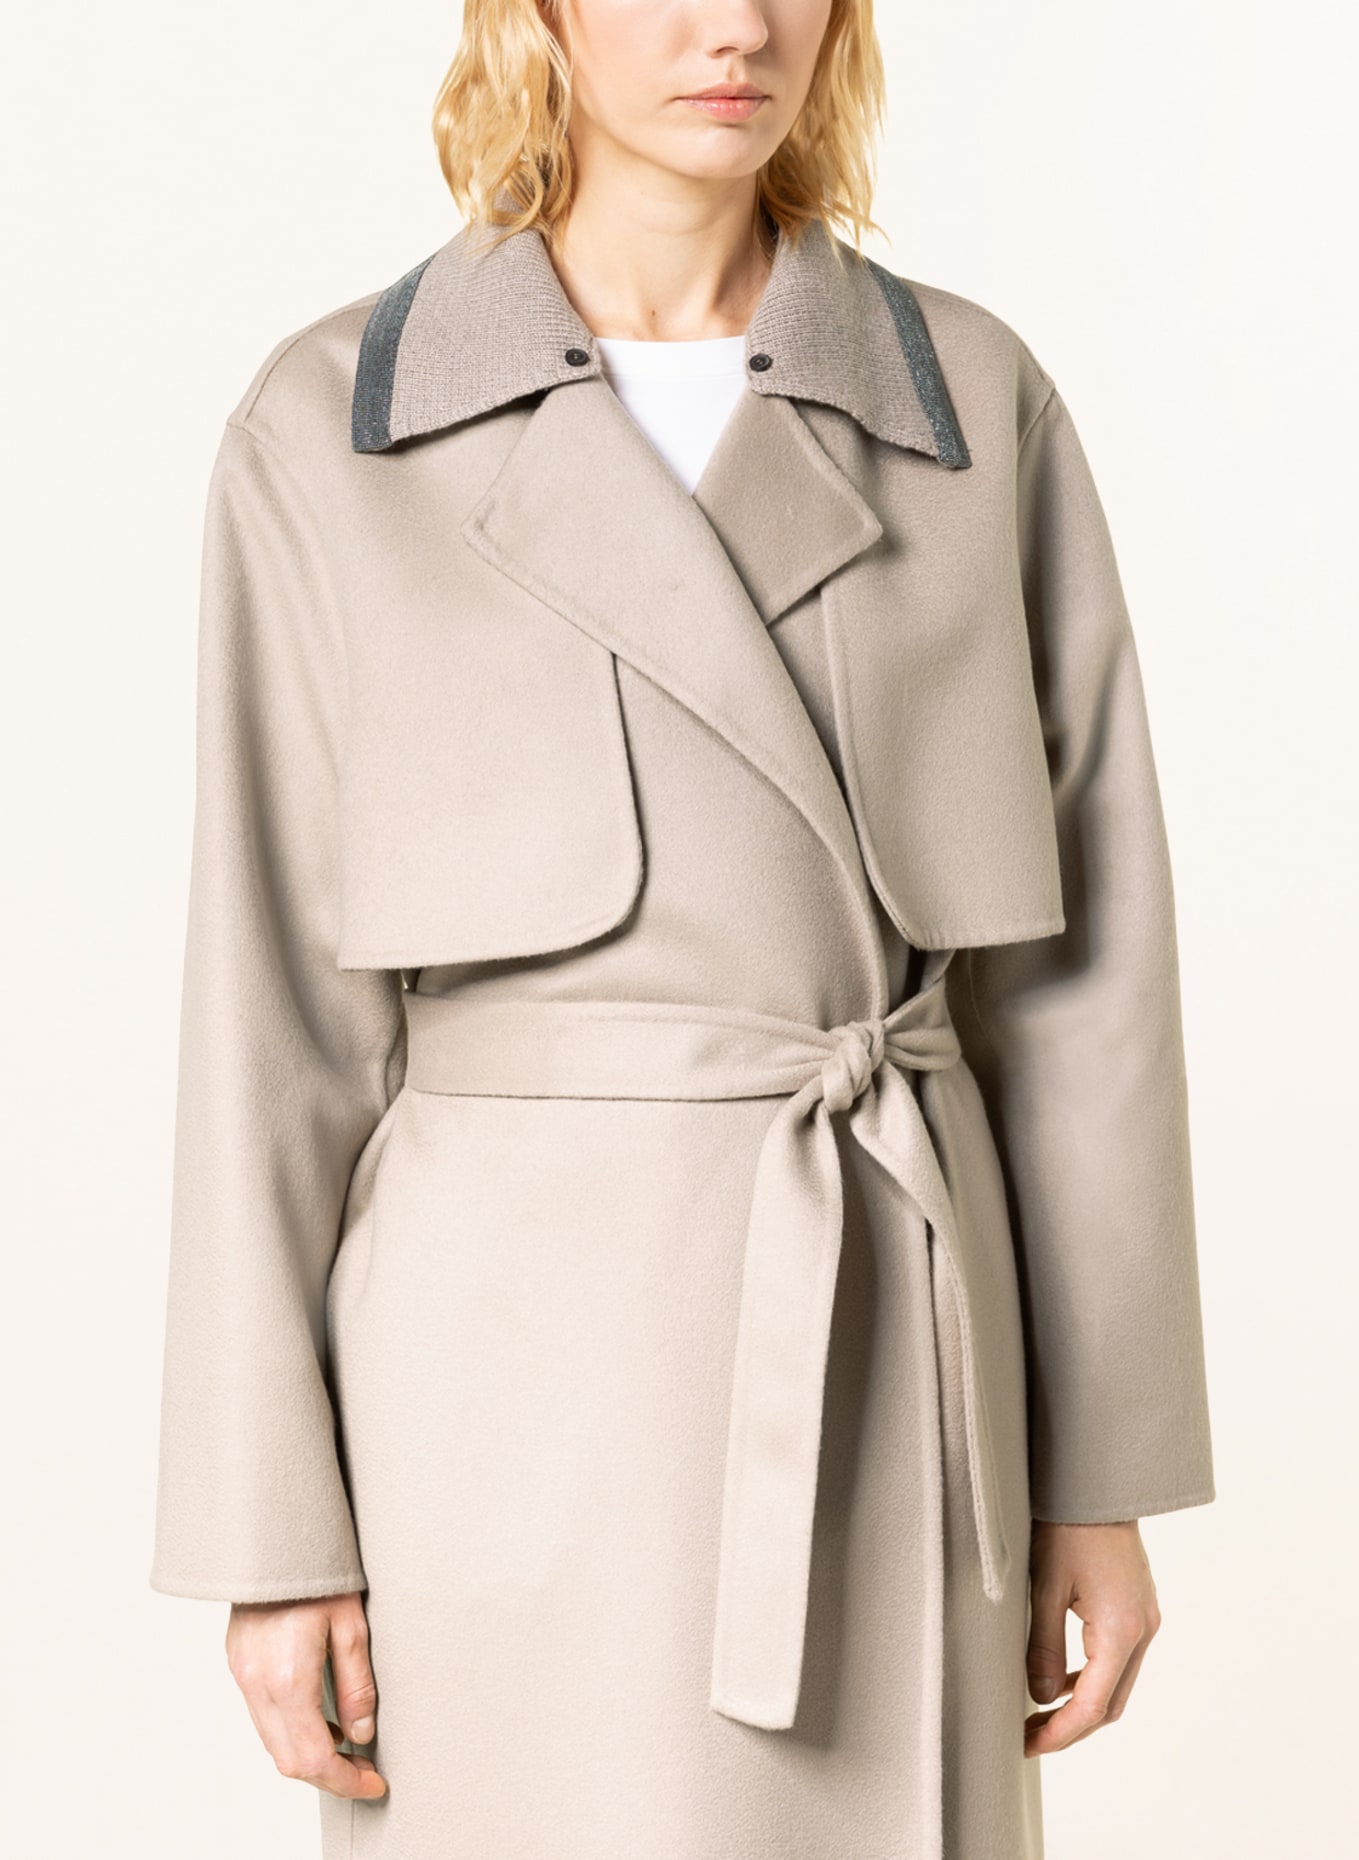 FABIANA FILIPPI Coat in merino wool with decorative beads, Color: TAUPE (Image 5)